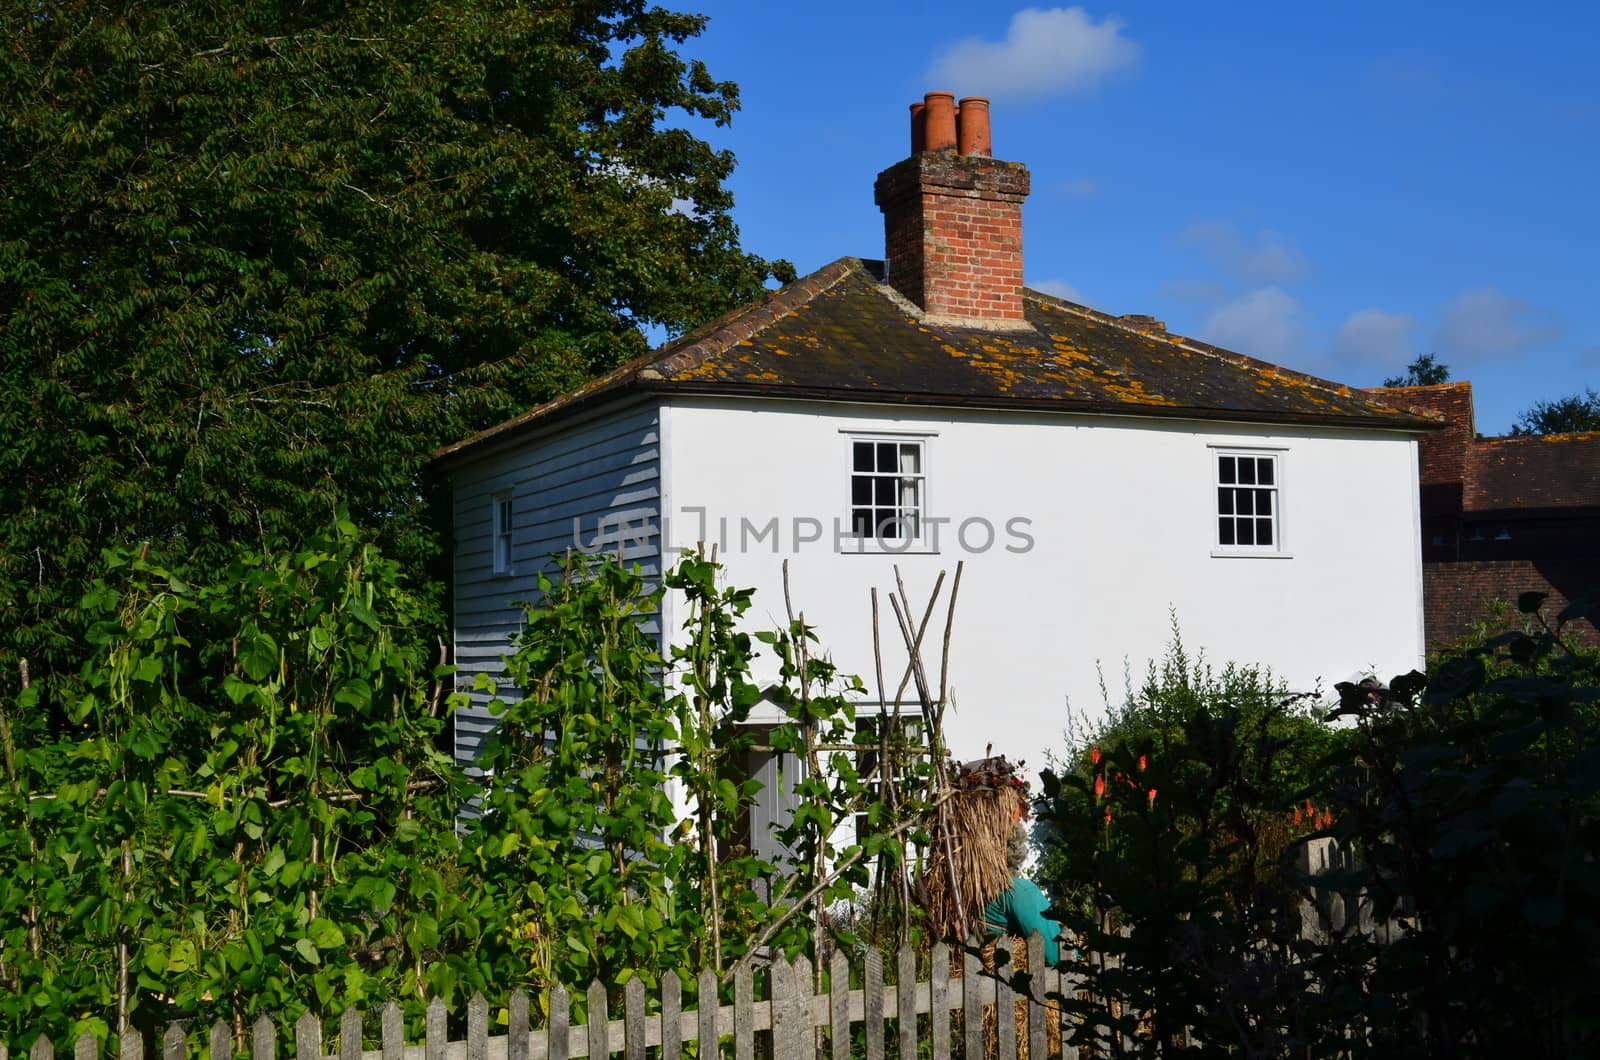 19th century English cottage with vegetable garden.